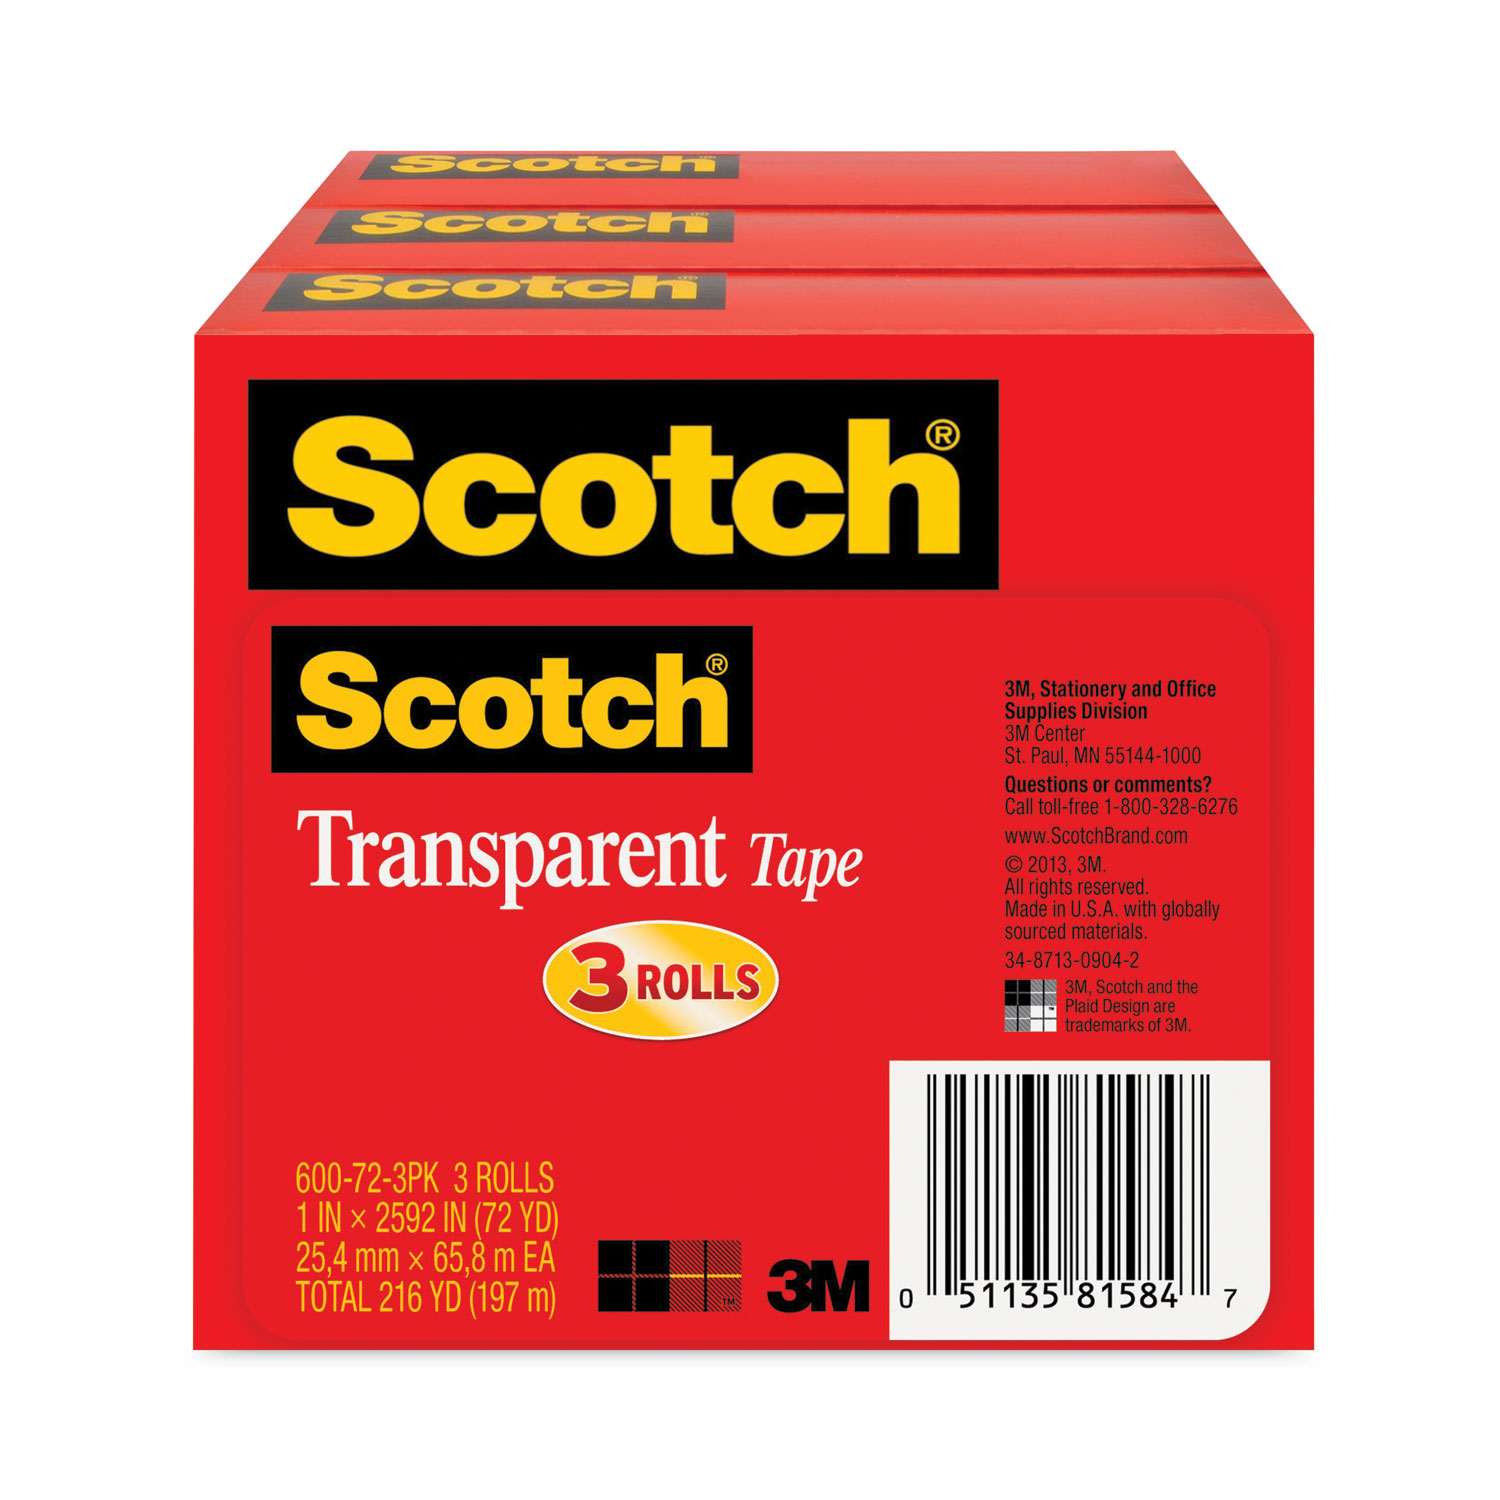 Scotch Transparent Tape 12 Pack, 3/4 in. x 1000 in., 12 Boxes/Pack